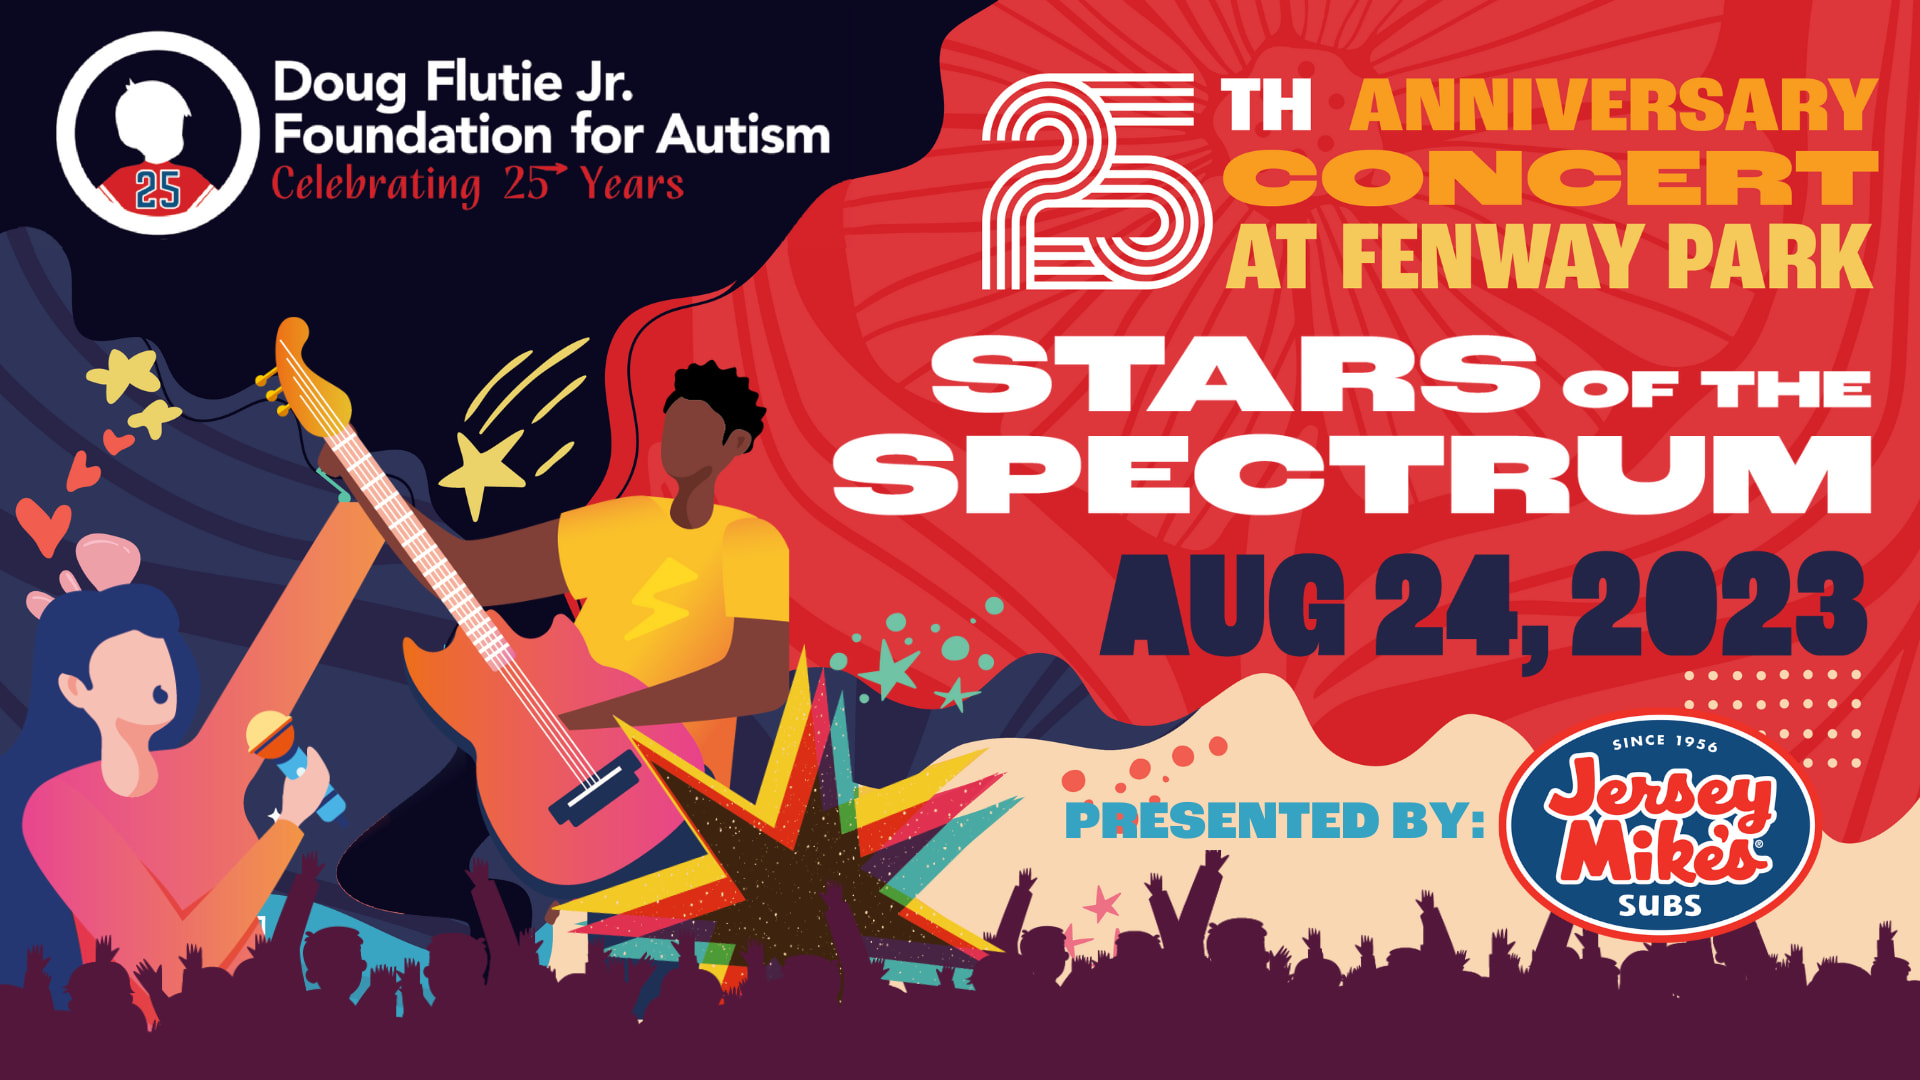 The Flutie Foundation Celebrates 25th Anniversary with "Stars of the